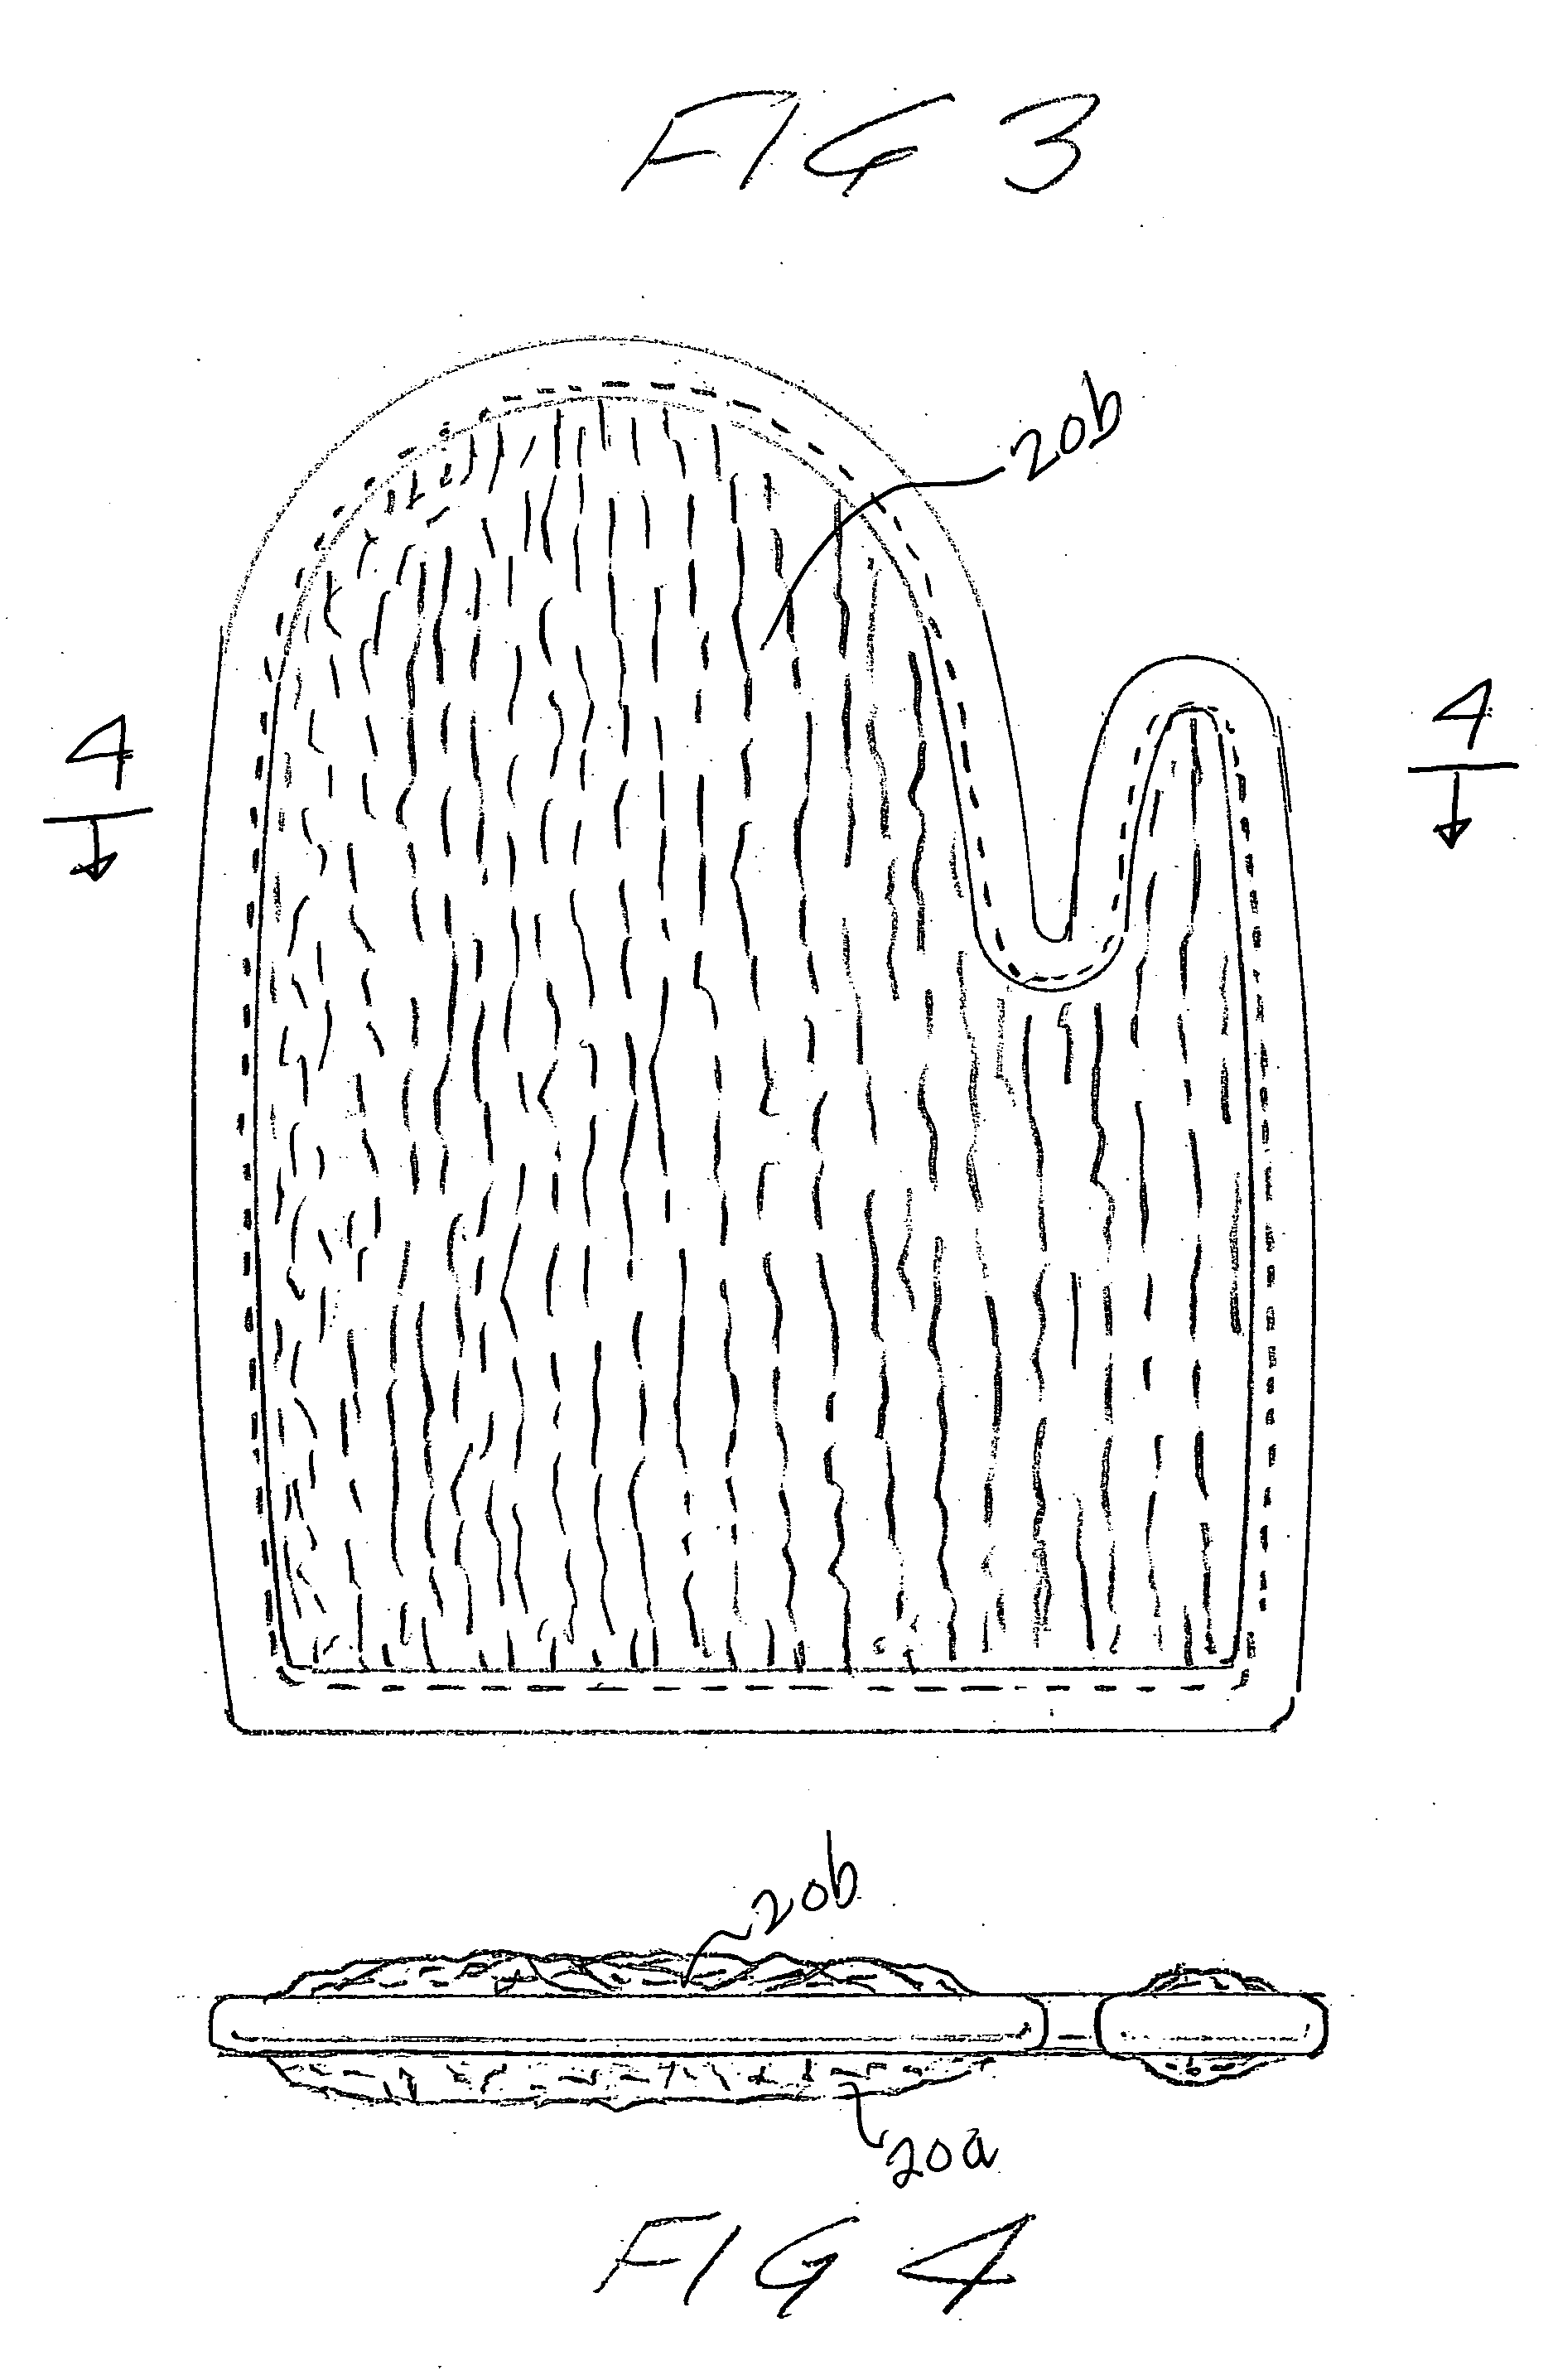 Loofah washcloth with varied areas of coarseness and method